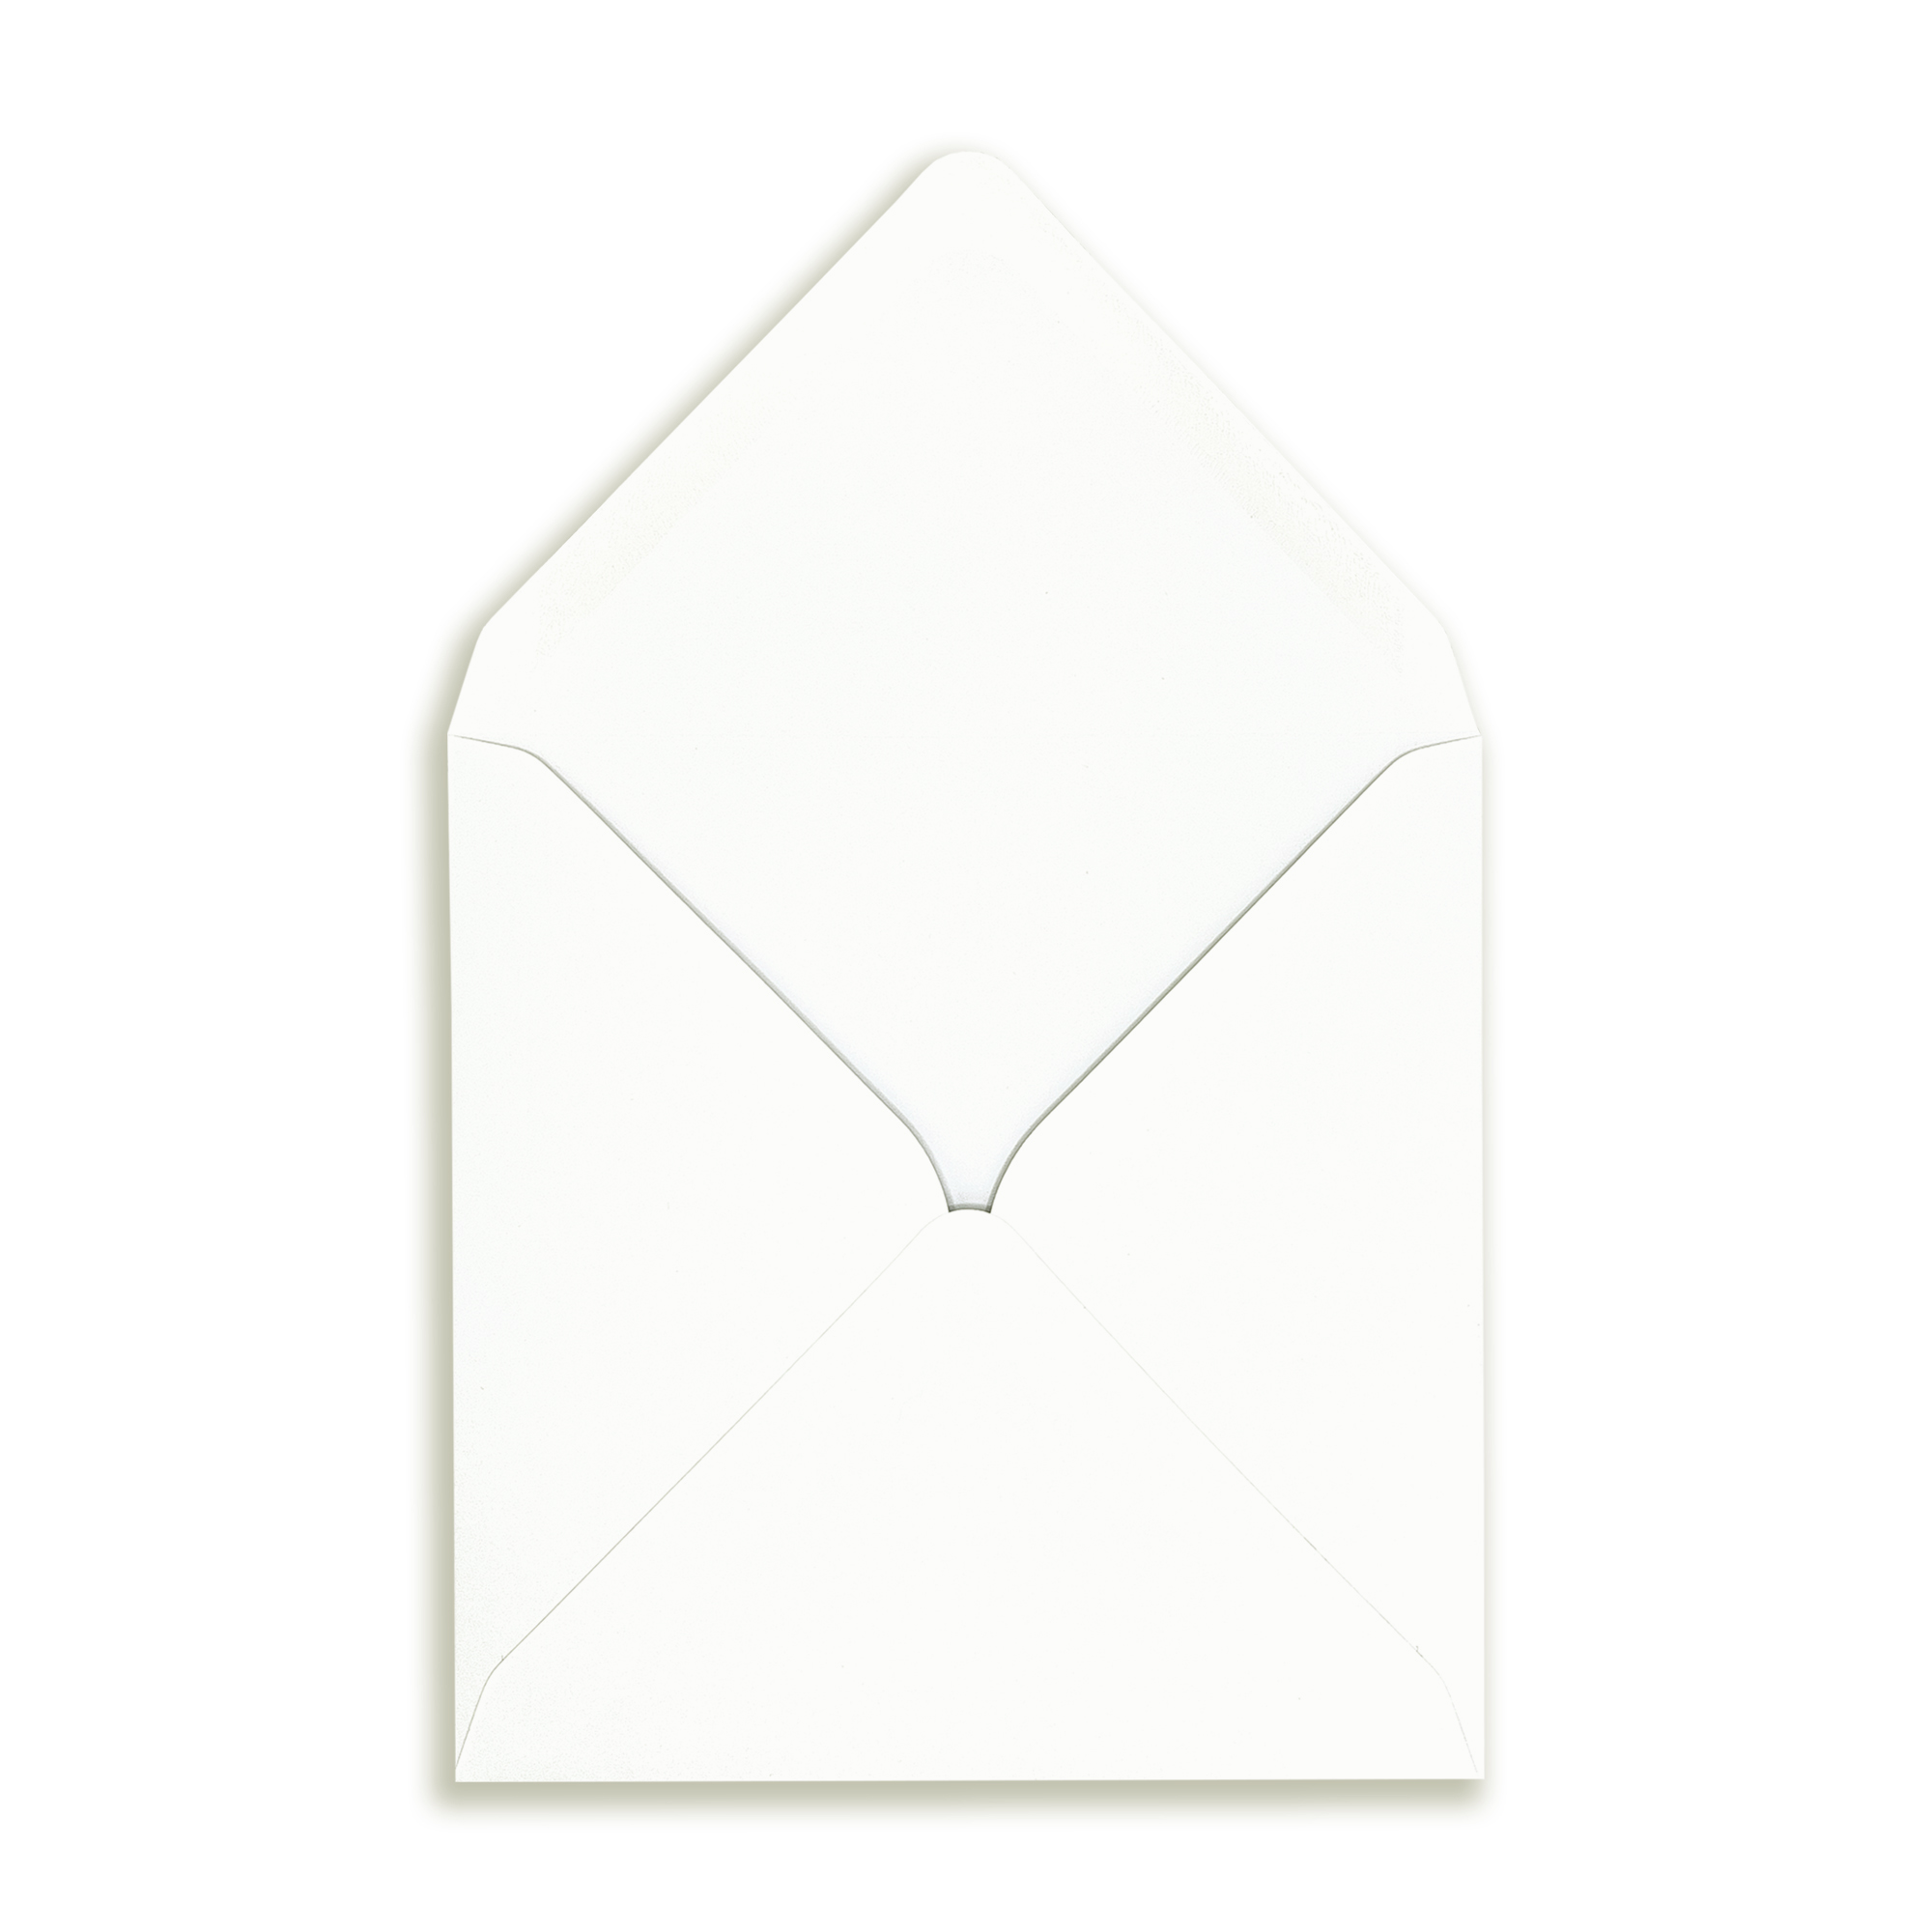 callisto_pearl_square_120gsm_Envelope_openflap